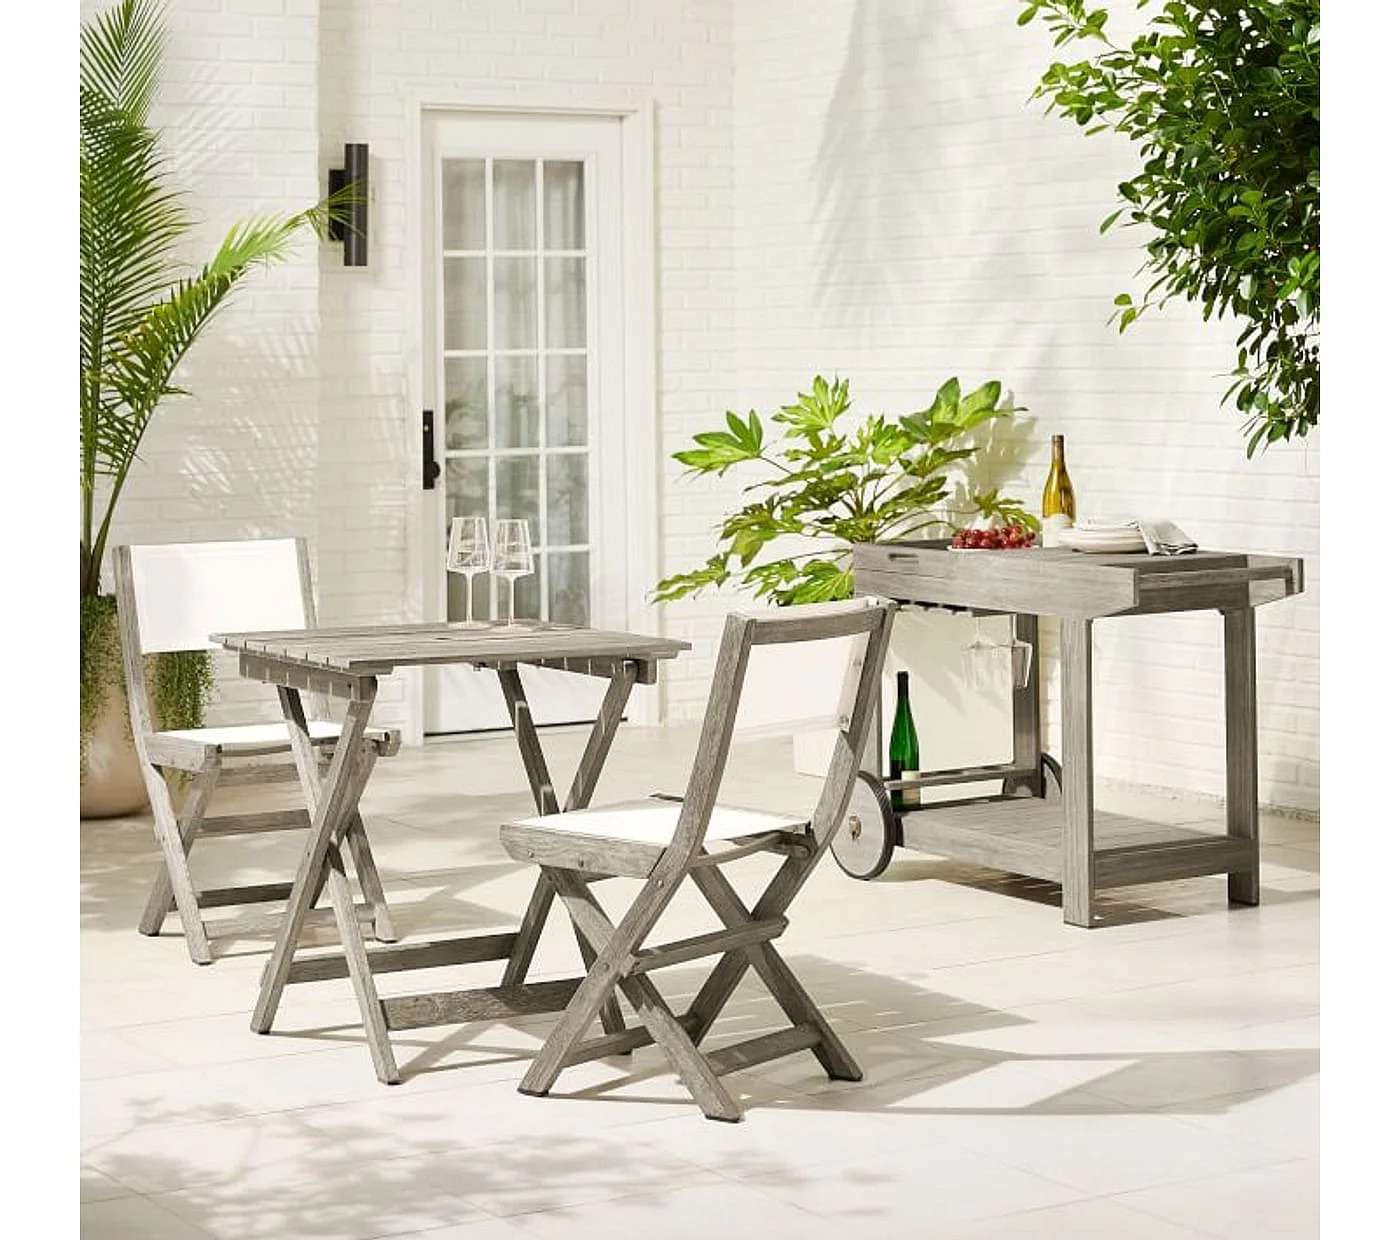 Outdoor oven Slope Dining Chair